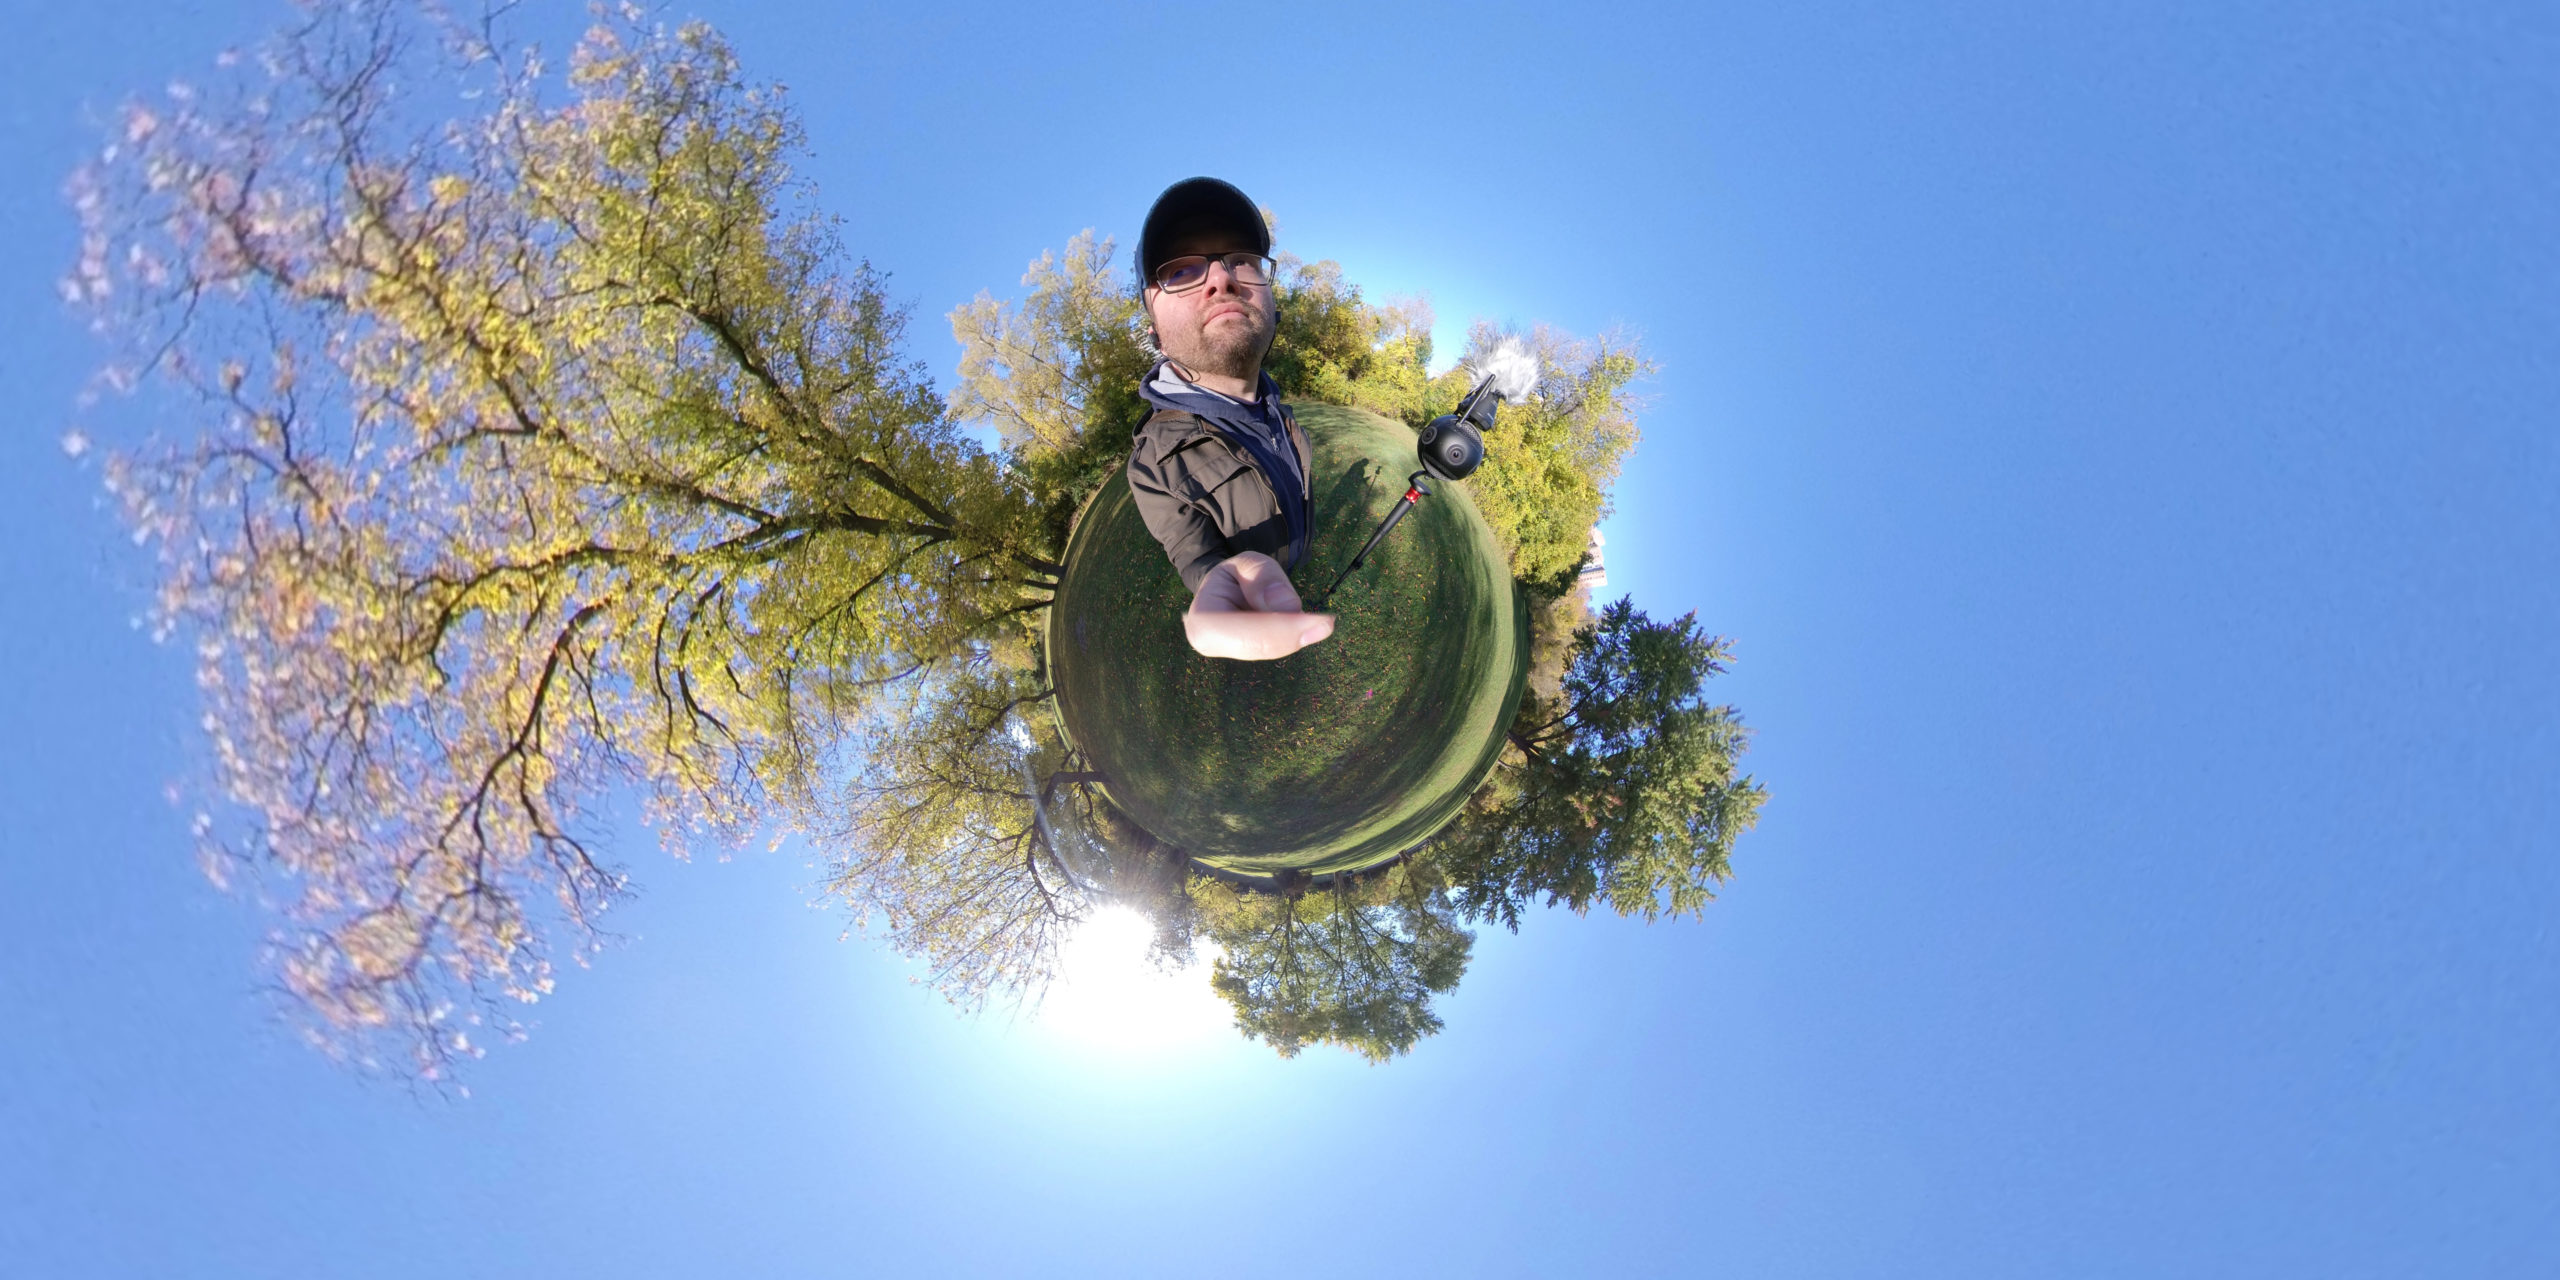 Screen shot of a 360 video bubble. There is a prominent tree and the photographers head visible against the blue background from the sky.